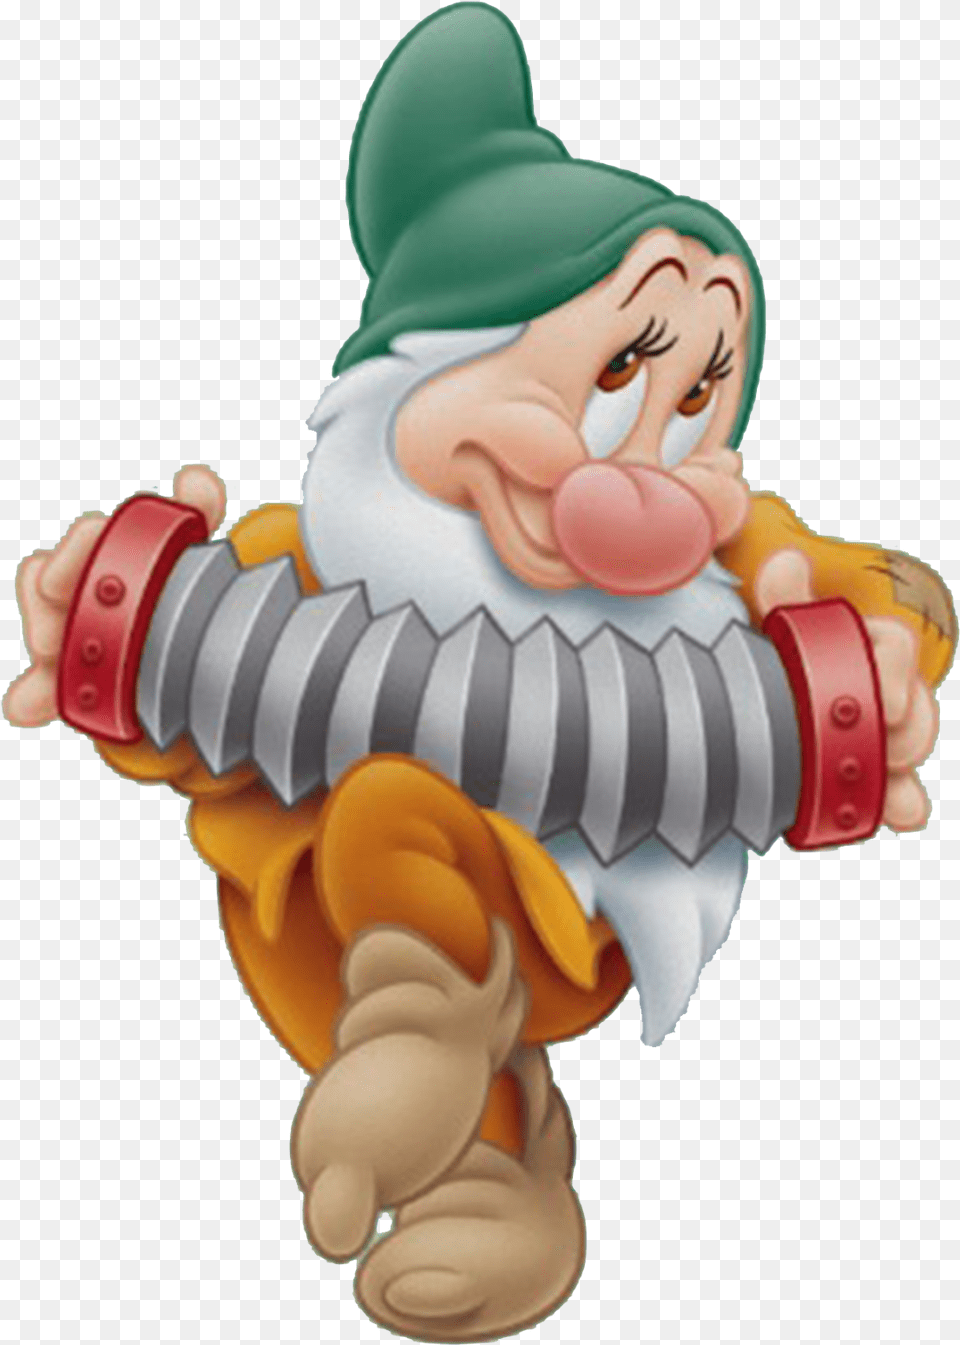 Snow White Prince And Dwarfs Clipart Seven Dwarfs Bashful, Baby, Person, Face, Head Free Transparent Png